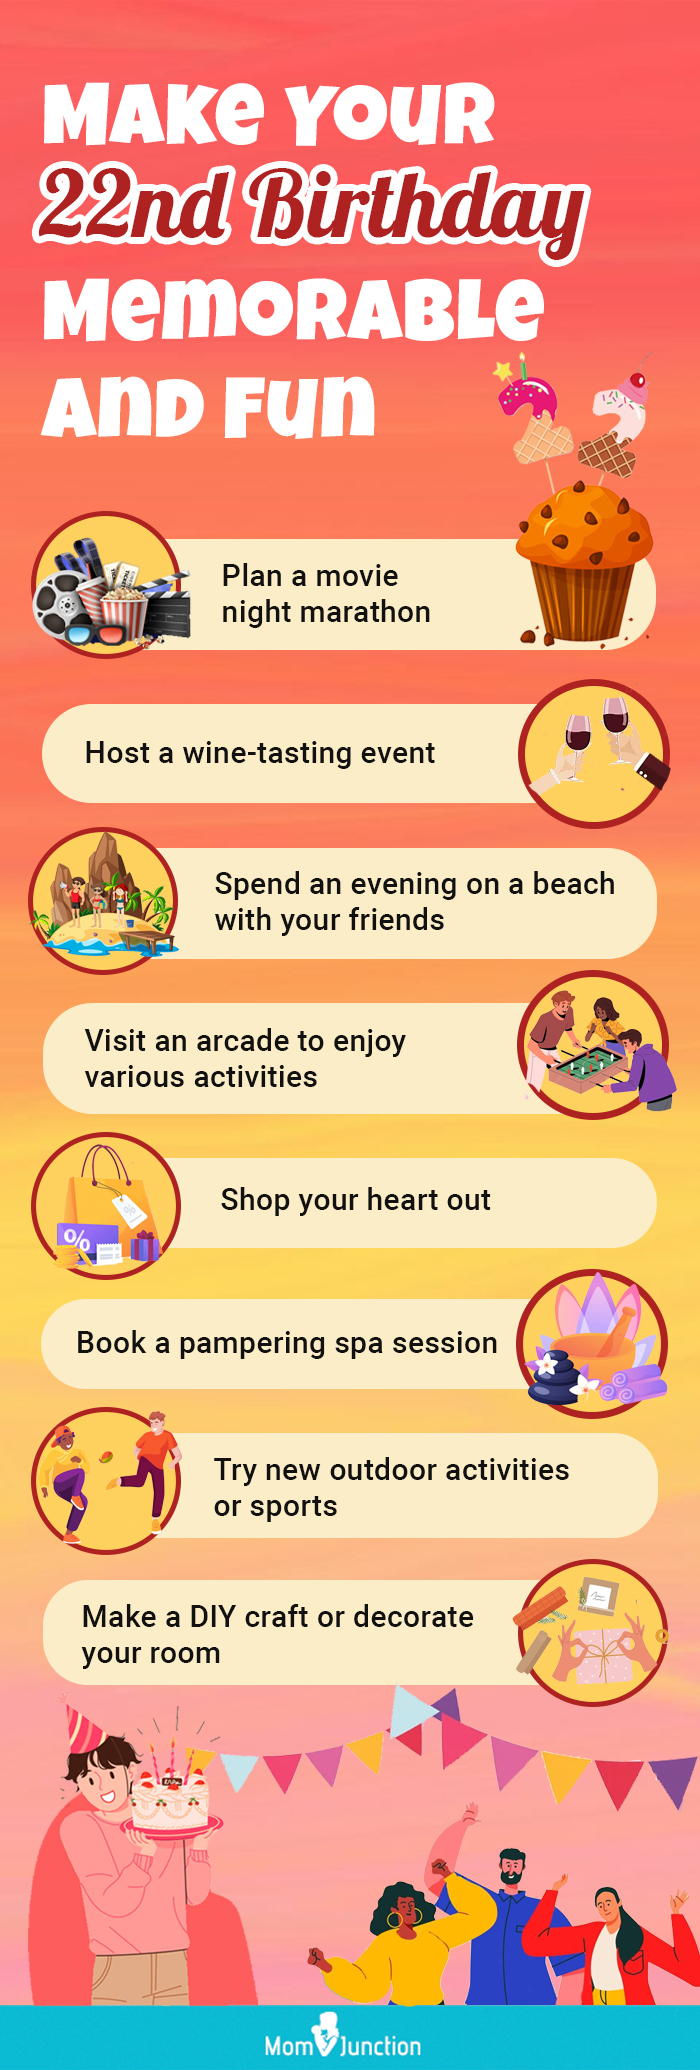 make your 22nd birthday memorable and fun [infographic]